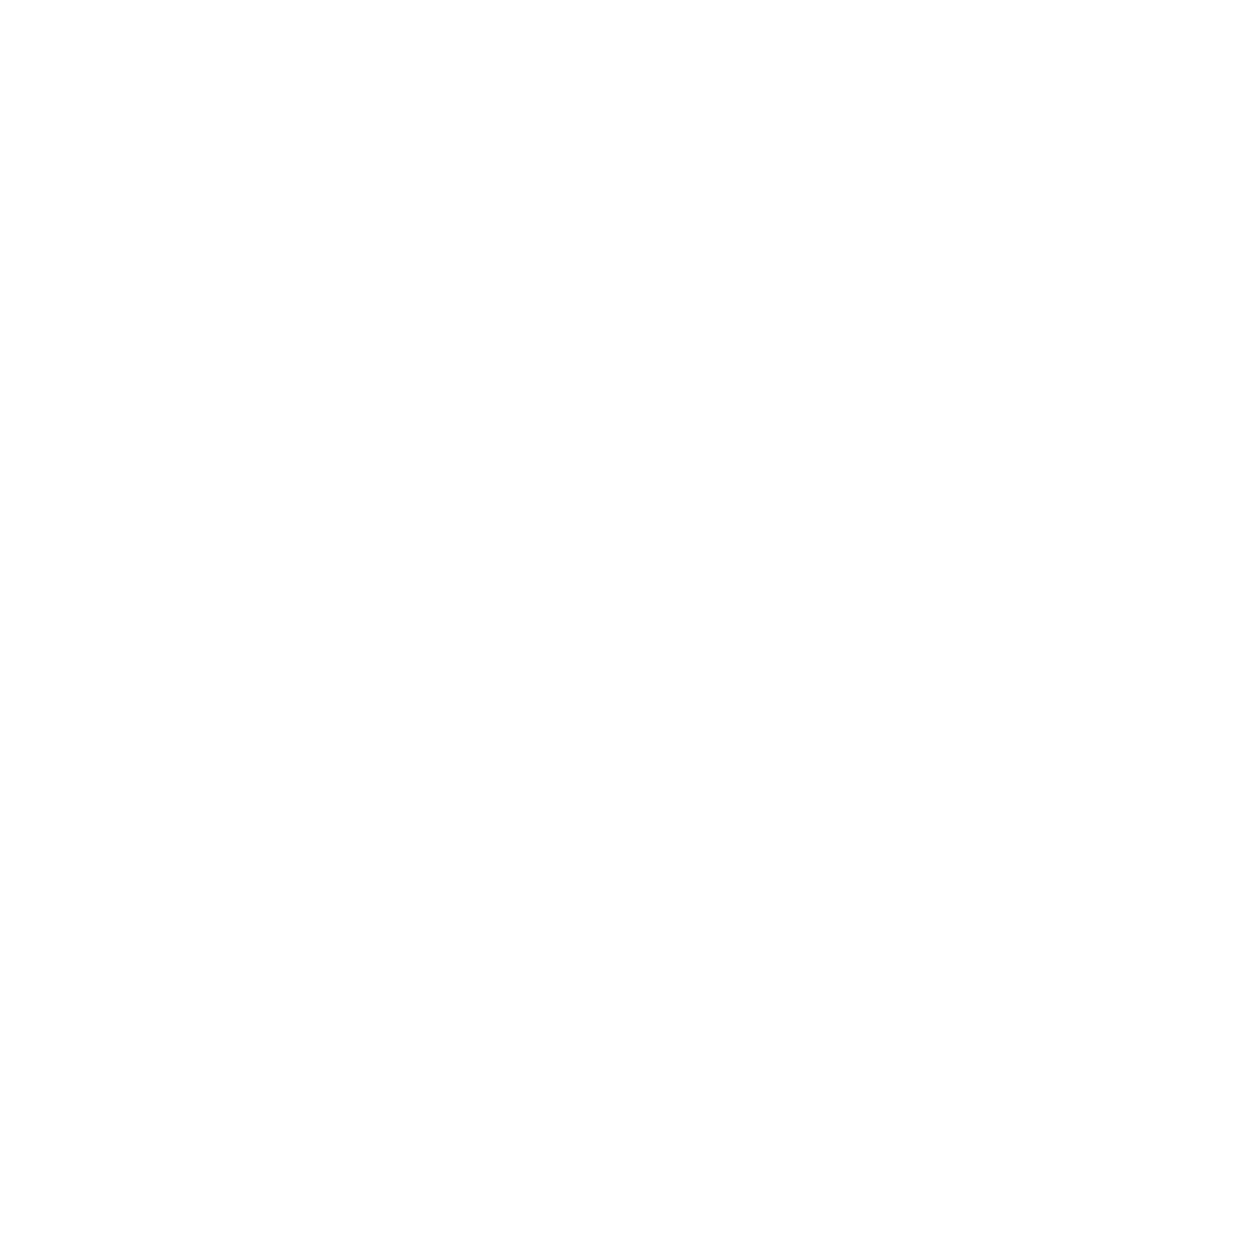 Can 16 year olds work in Texas?